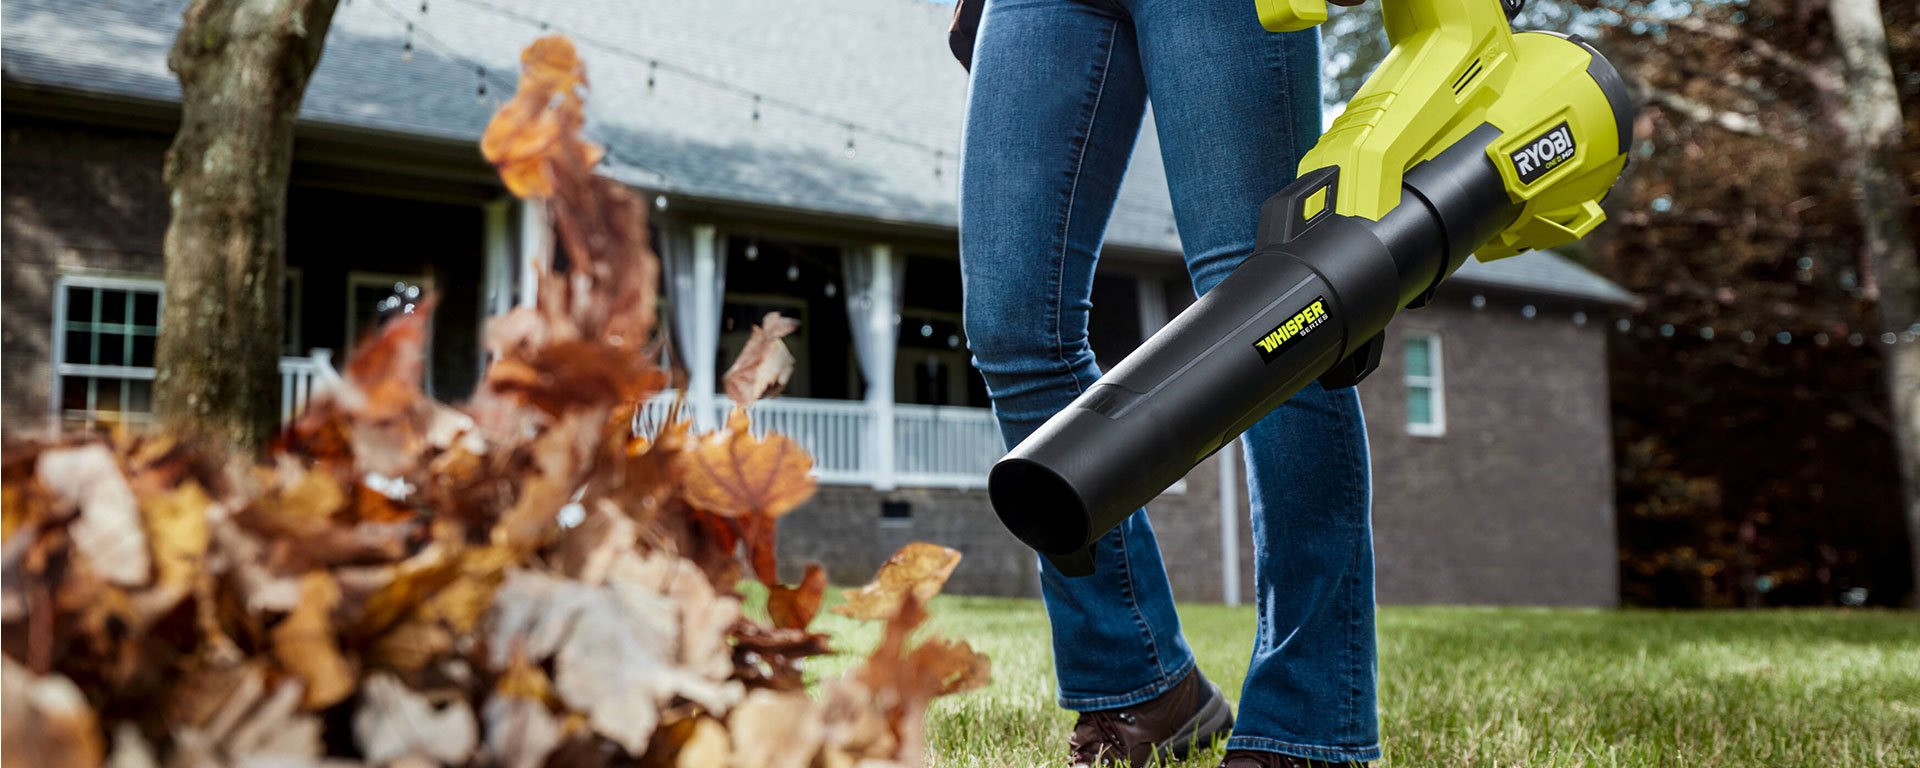 Are Leaf Blowers Worth It? 